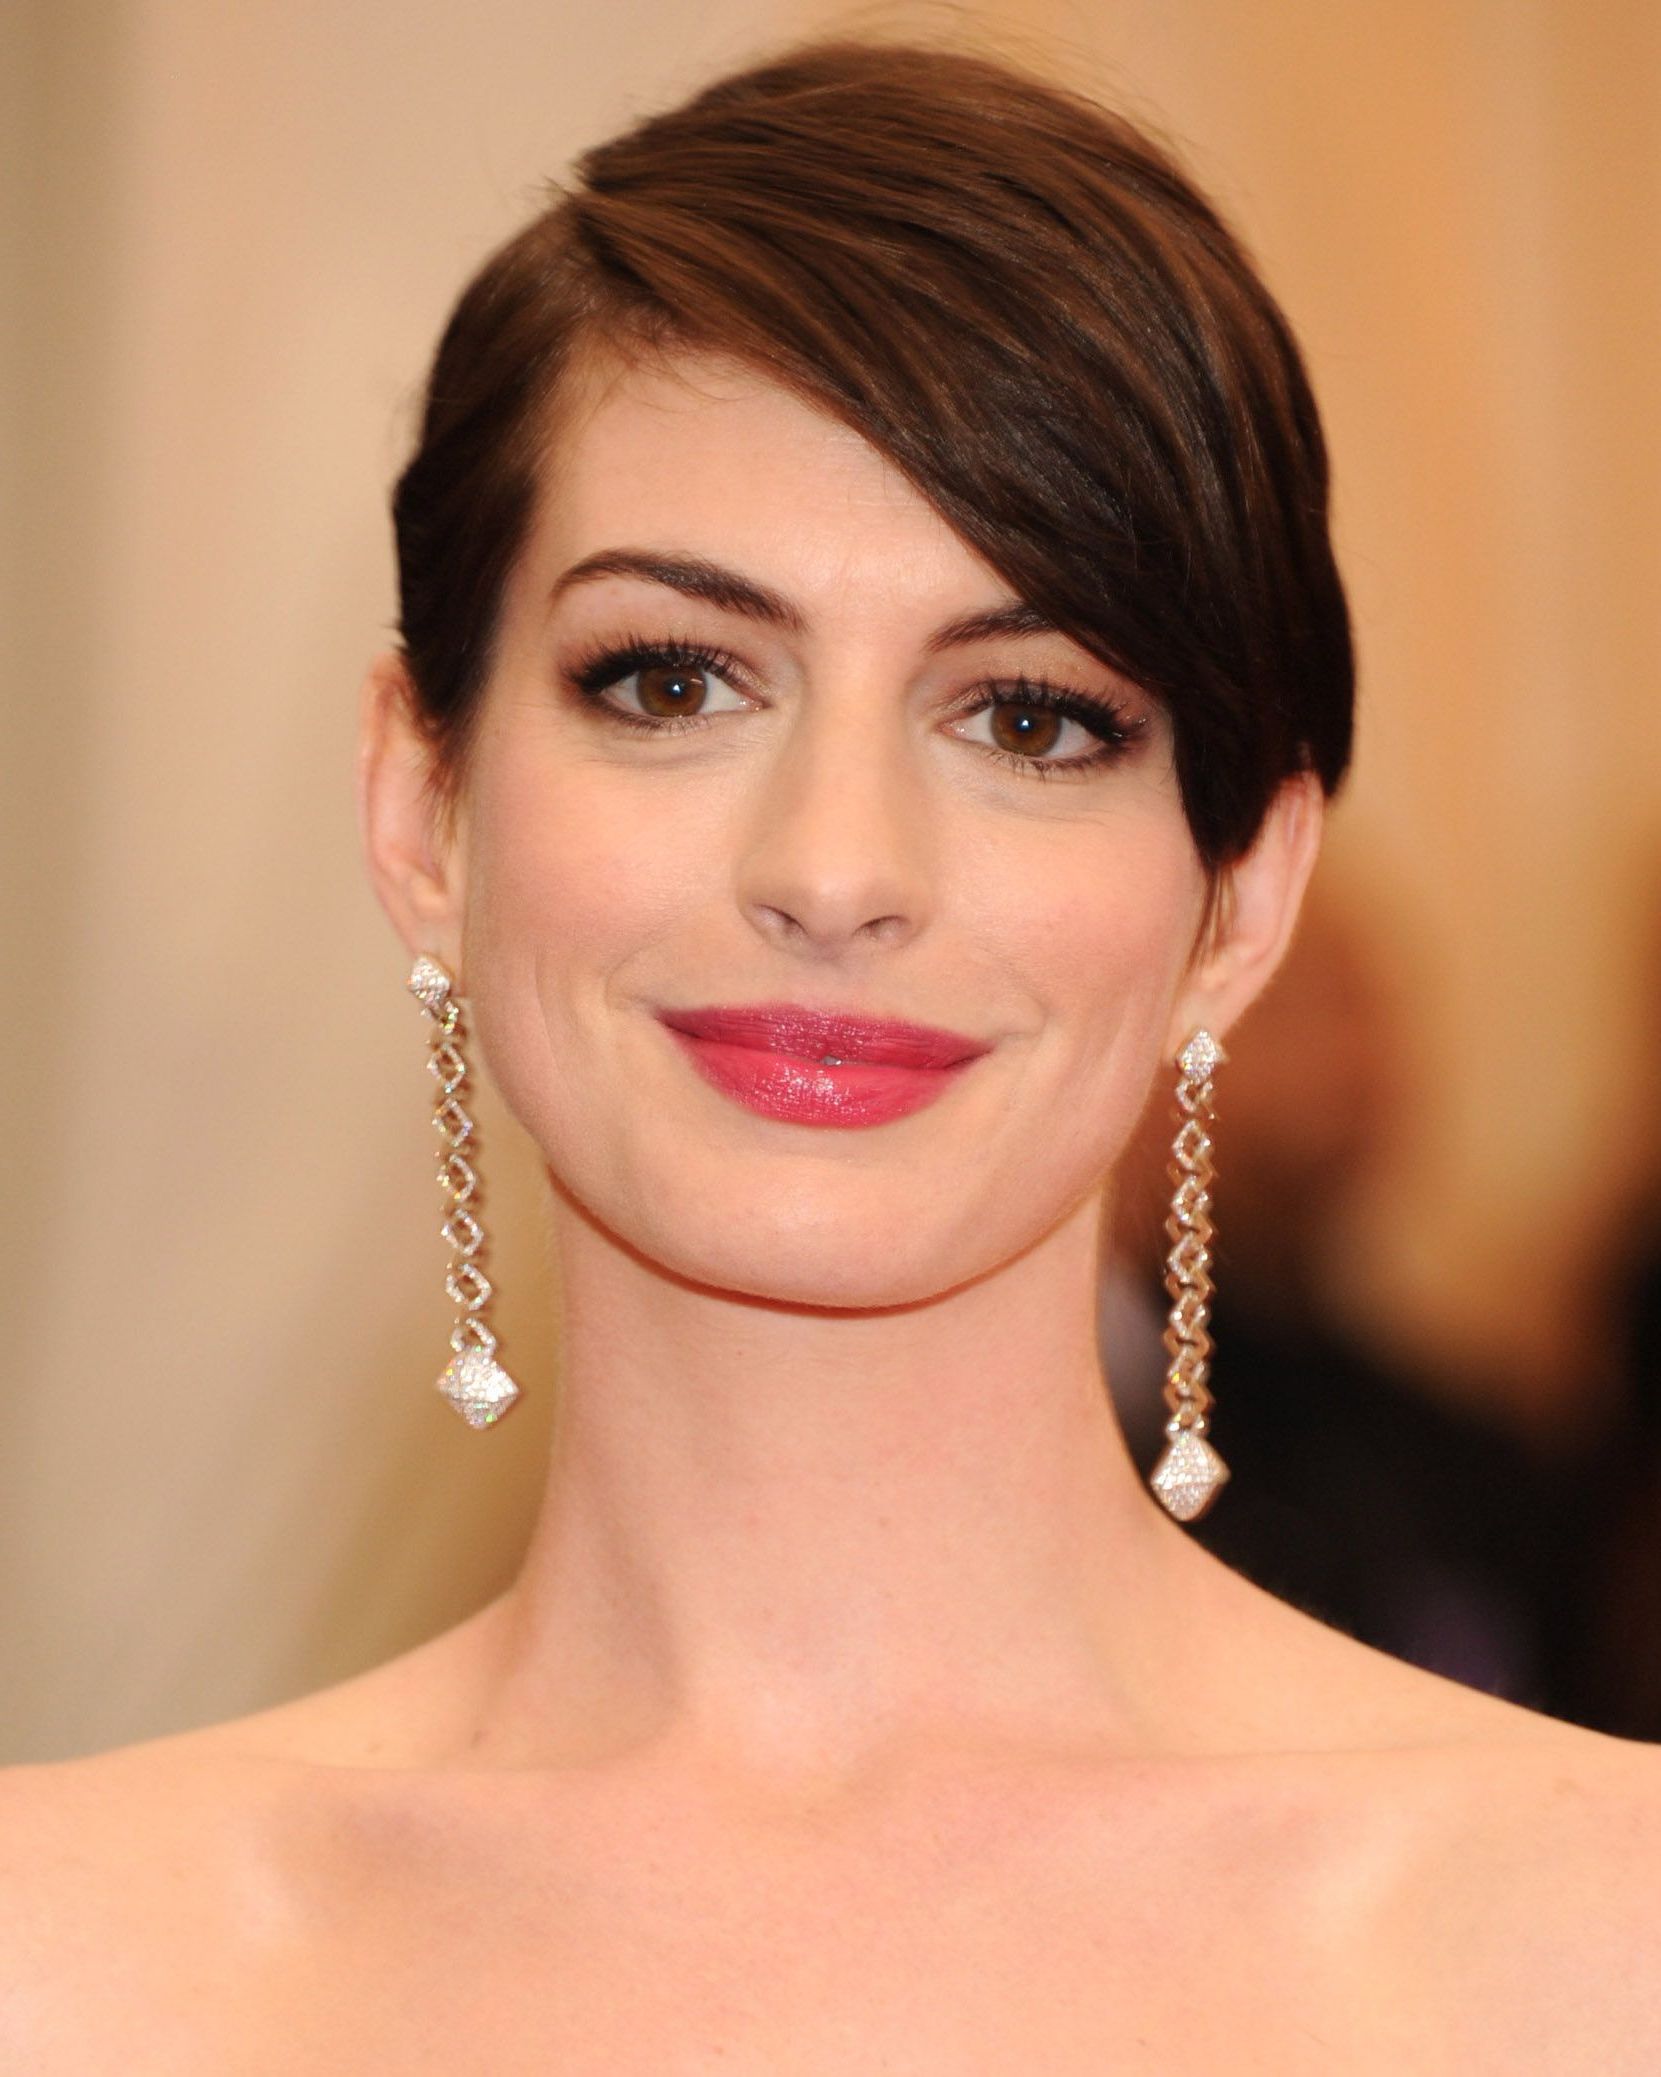 32 Best Short Hair Styles – Bobs, Pixie Cuts, And More Celebrity For Short Haircuts For Women In 20s (Photo 16 of 25)